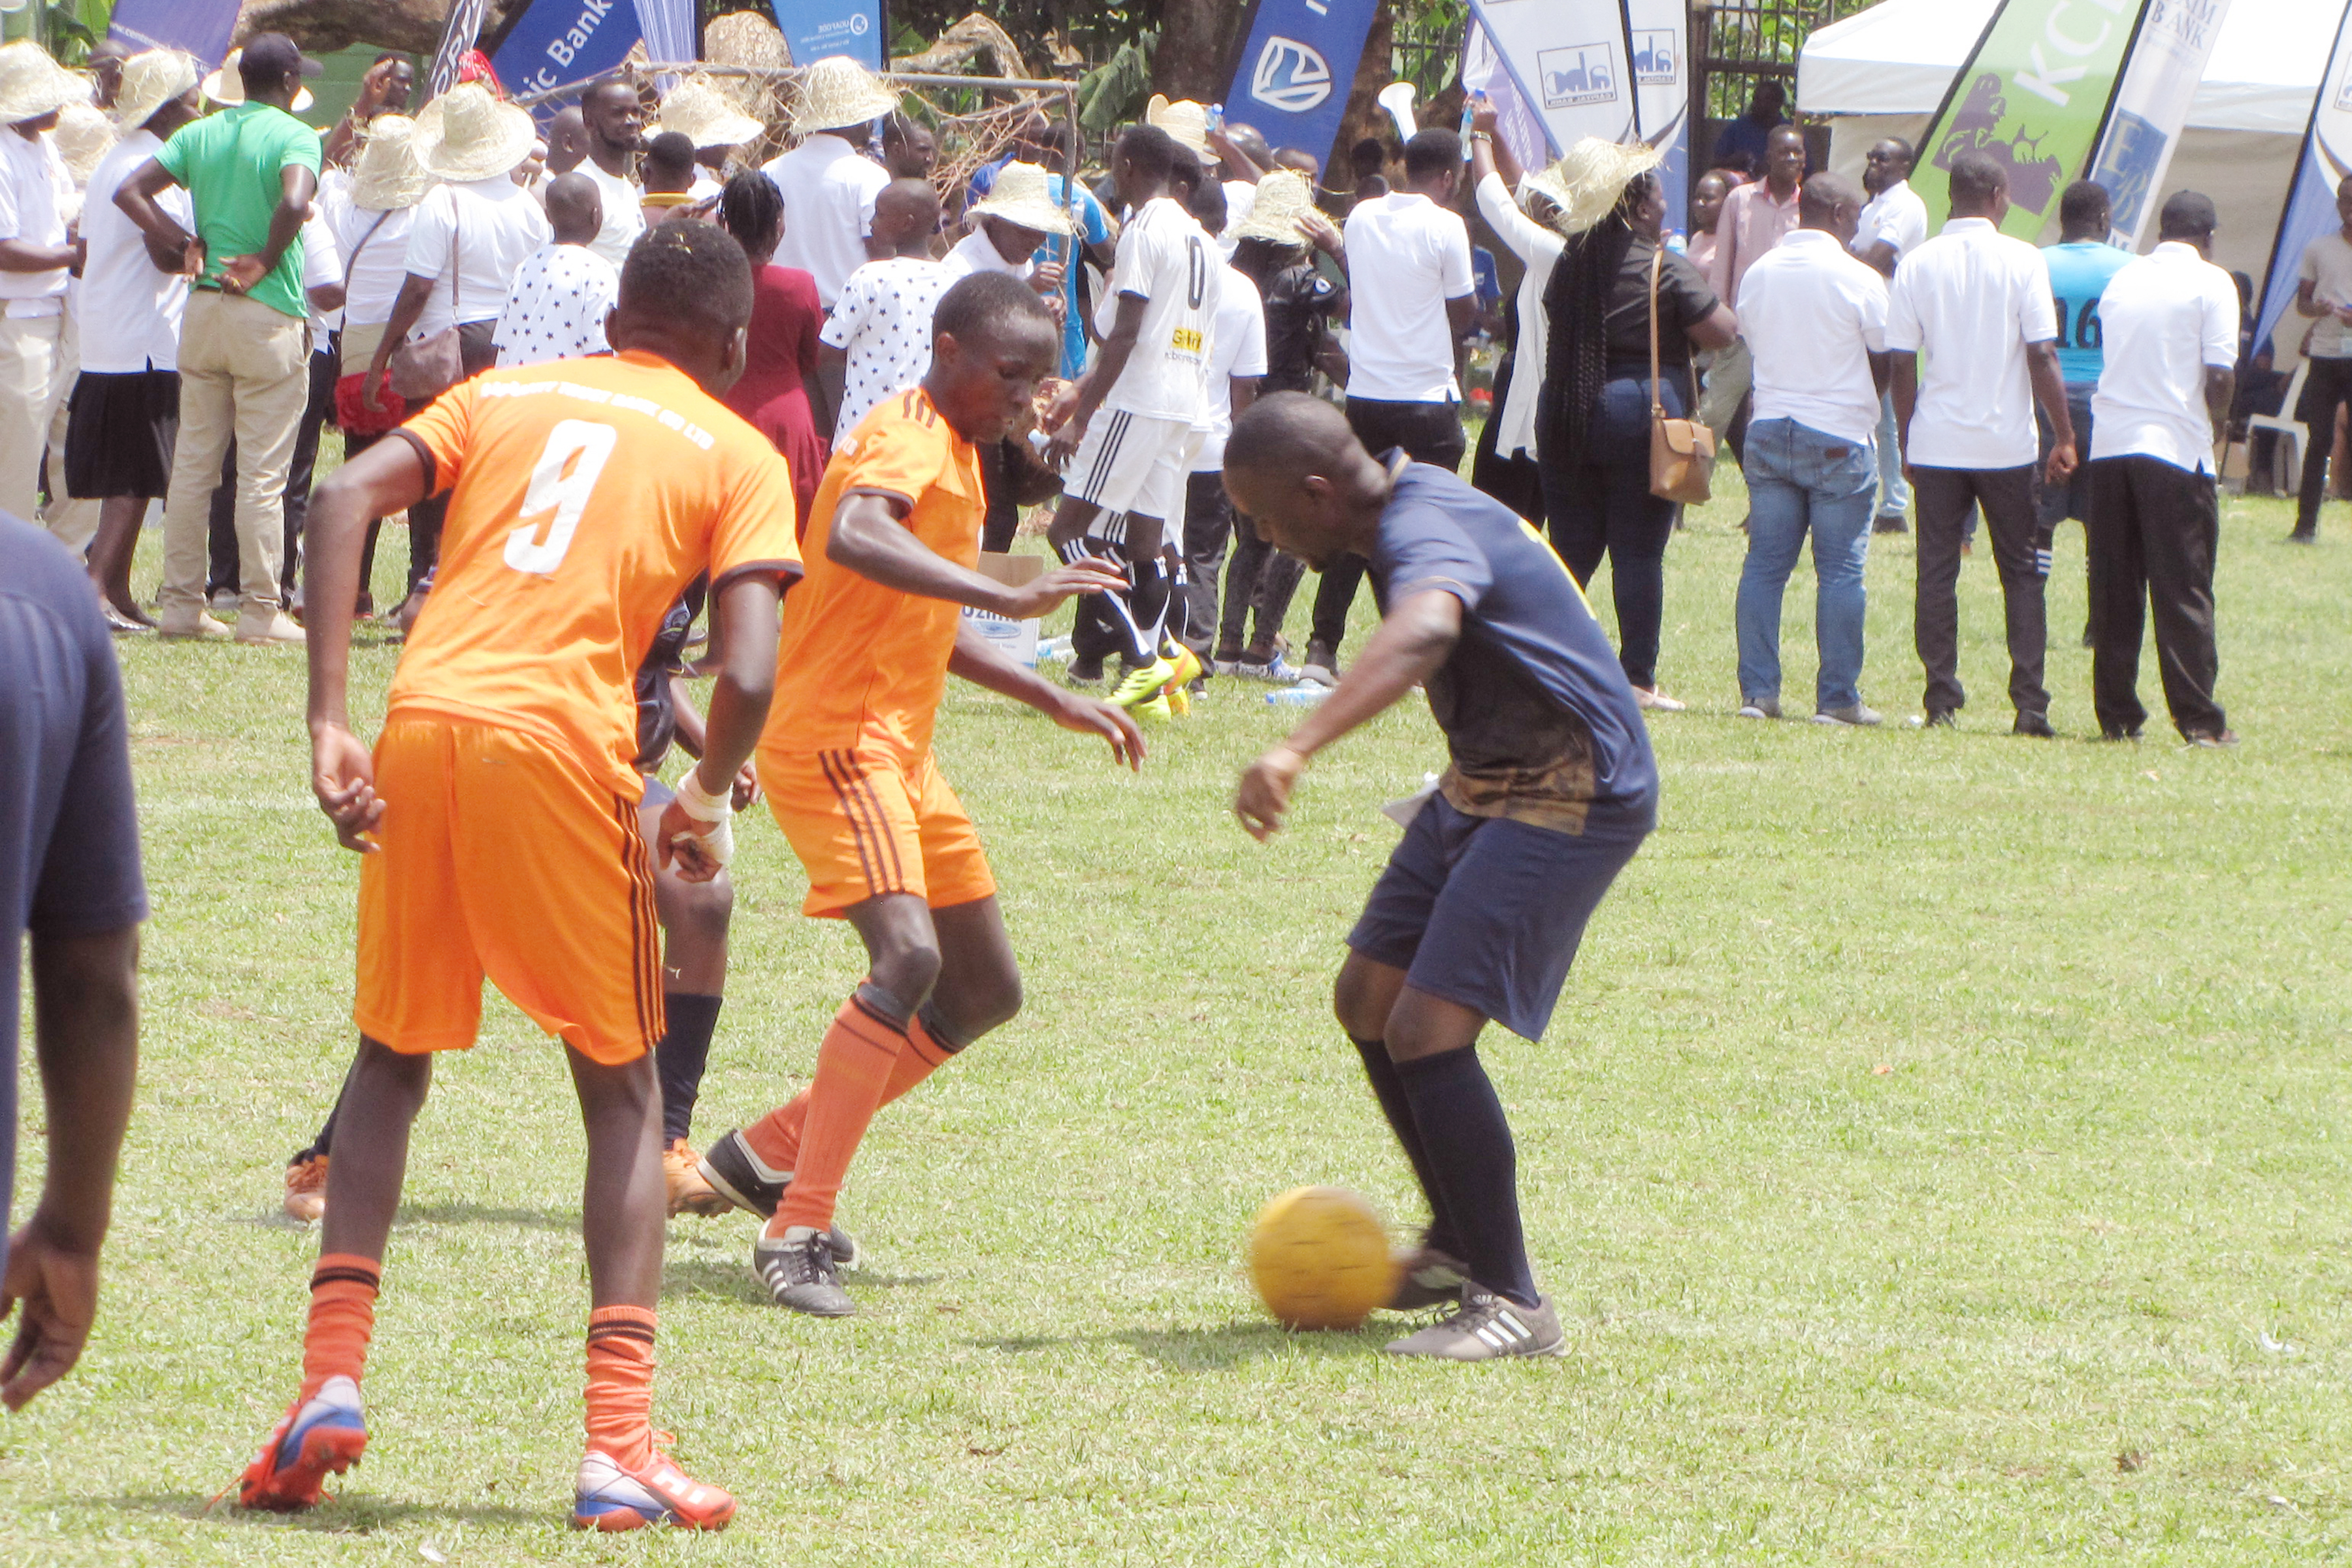 Staff participates in Mens' Football Game